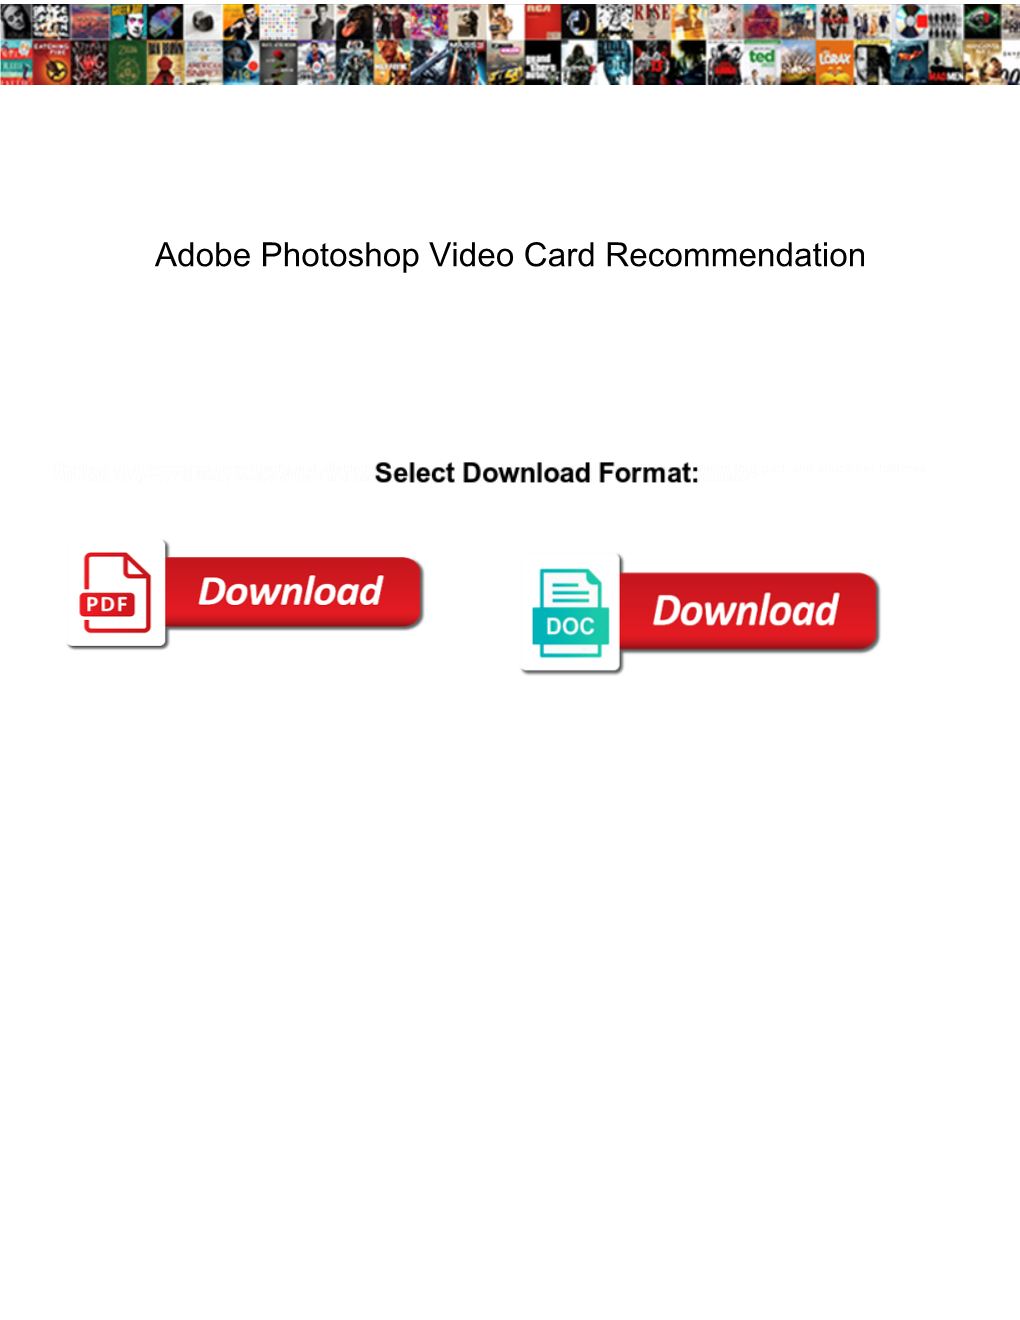 Adobe Photoshop Video Card Recommendation